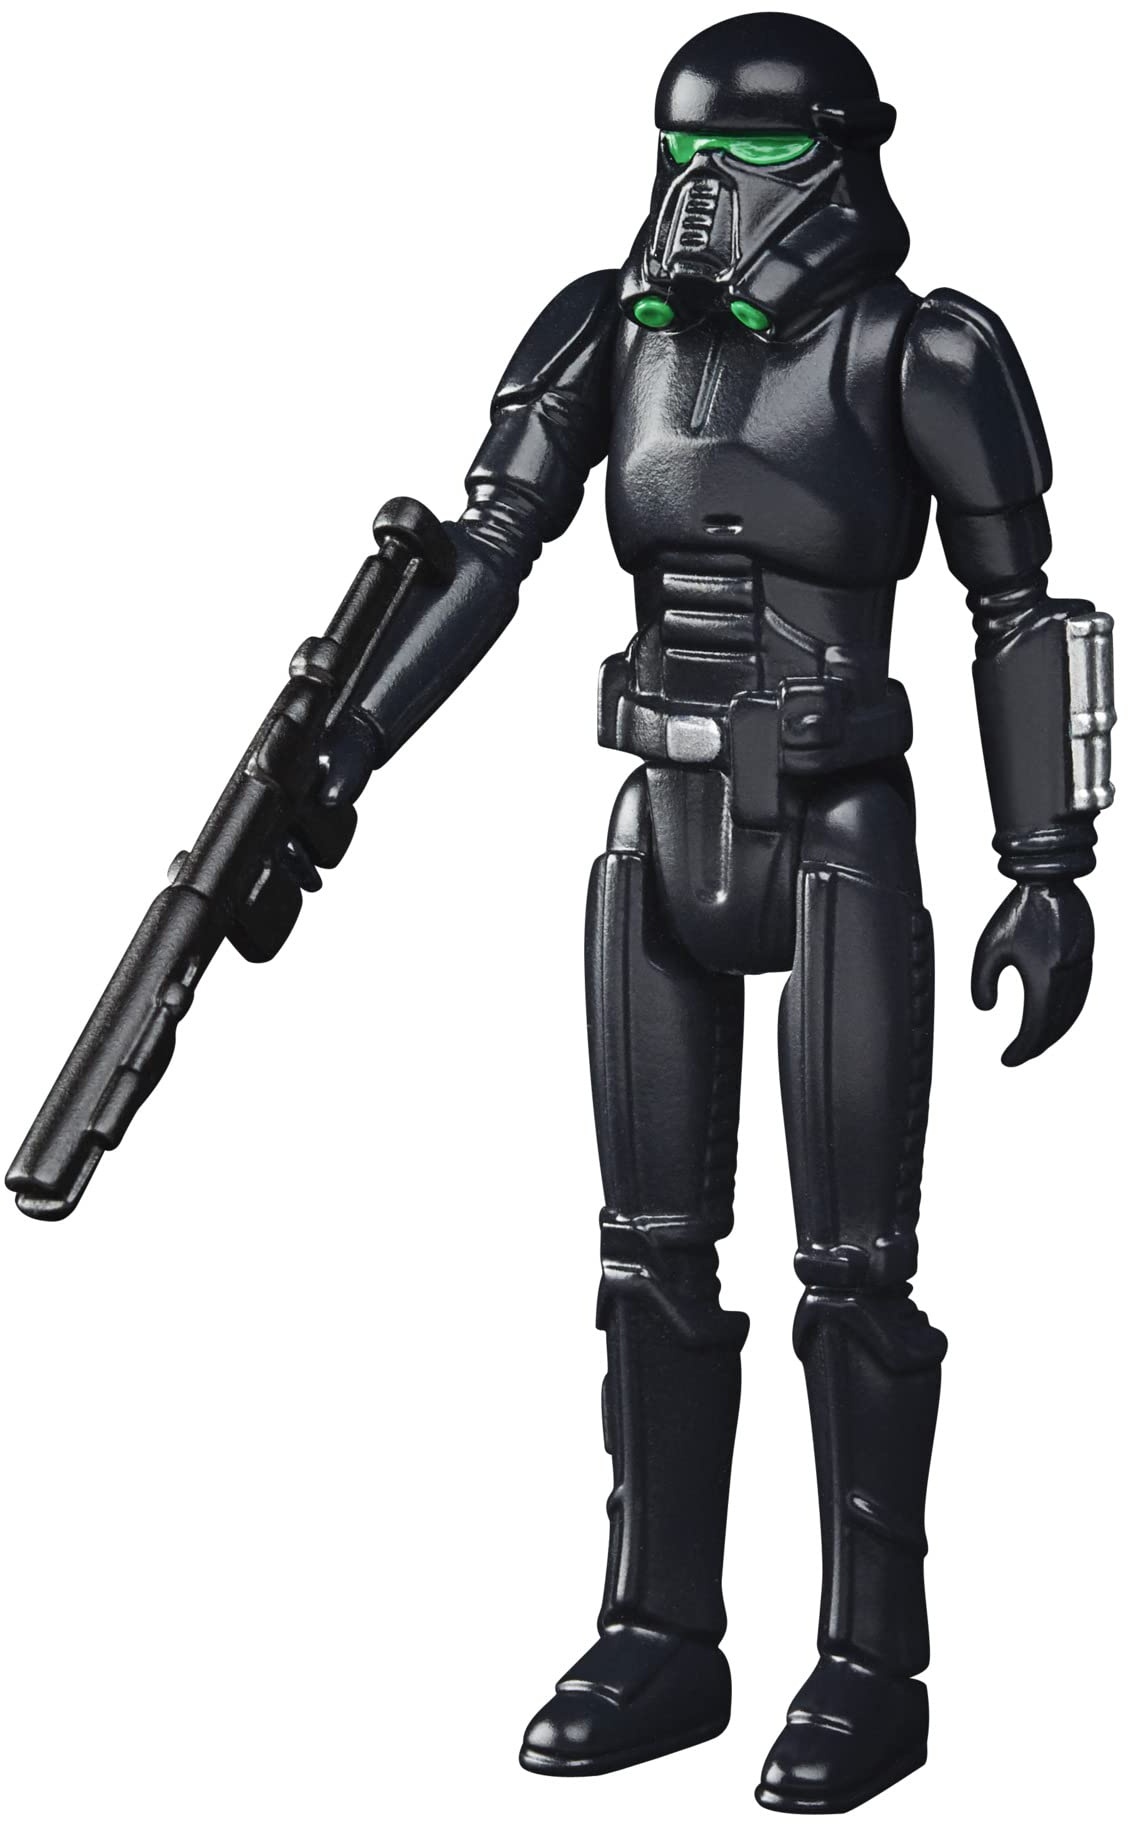 Star Wars Hasbro Retro Collection Imperial Death Trooper Toy 9.5 cm-Scale The Mandalorian Collectible Action Figure, Kids 4 and Up F4457 Multi